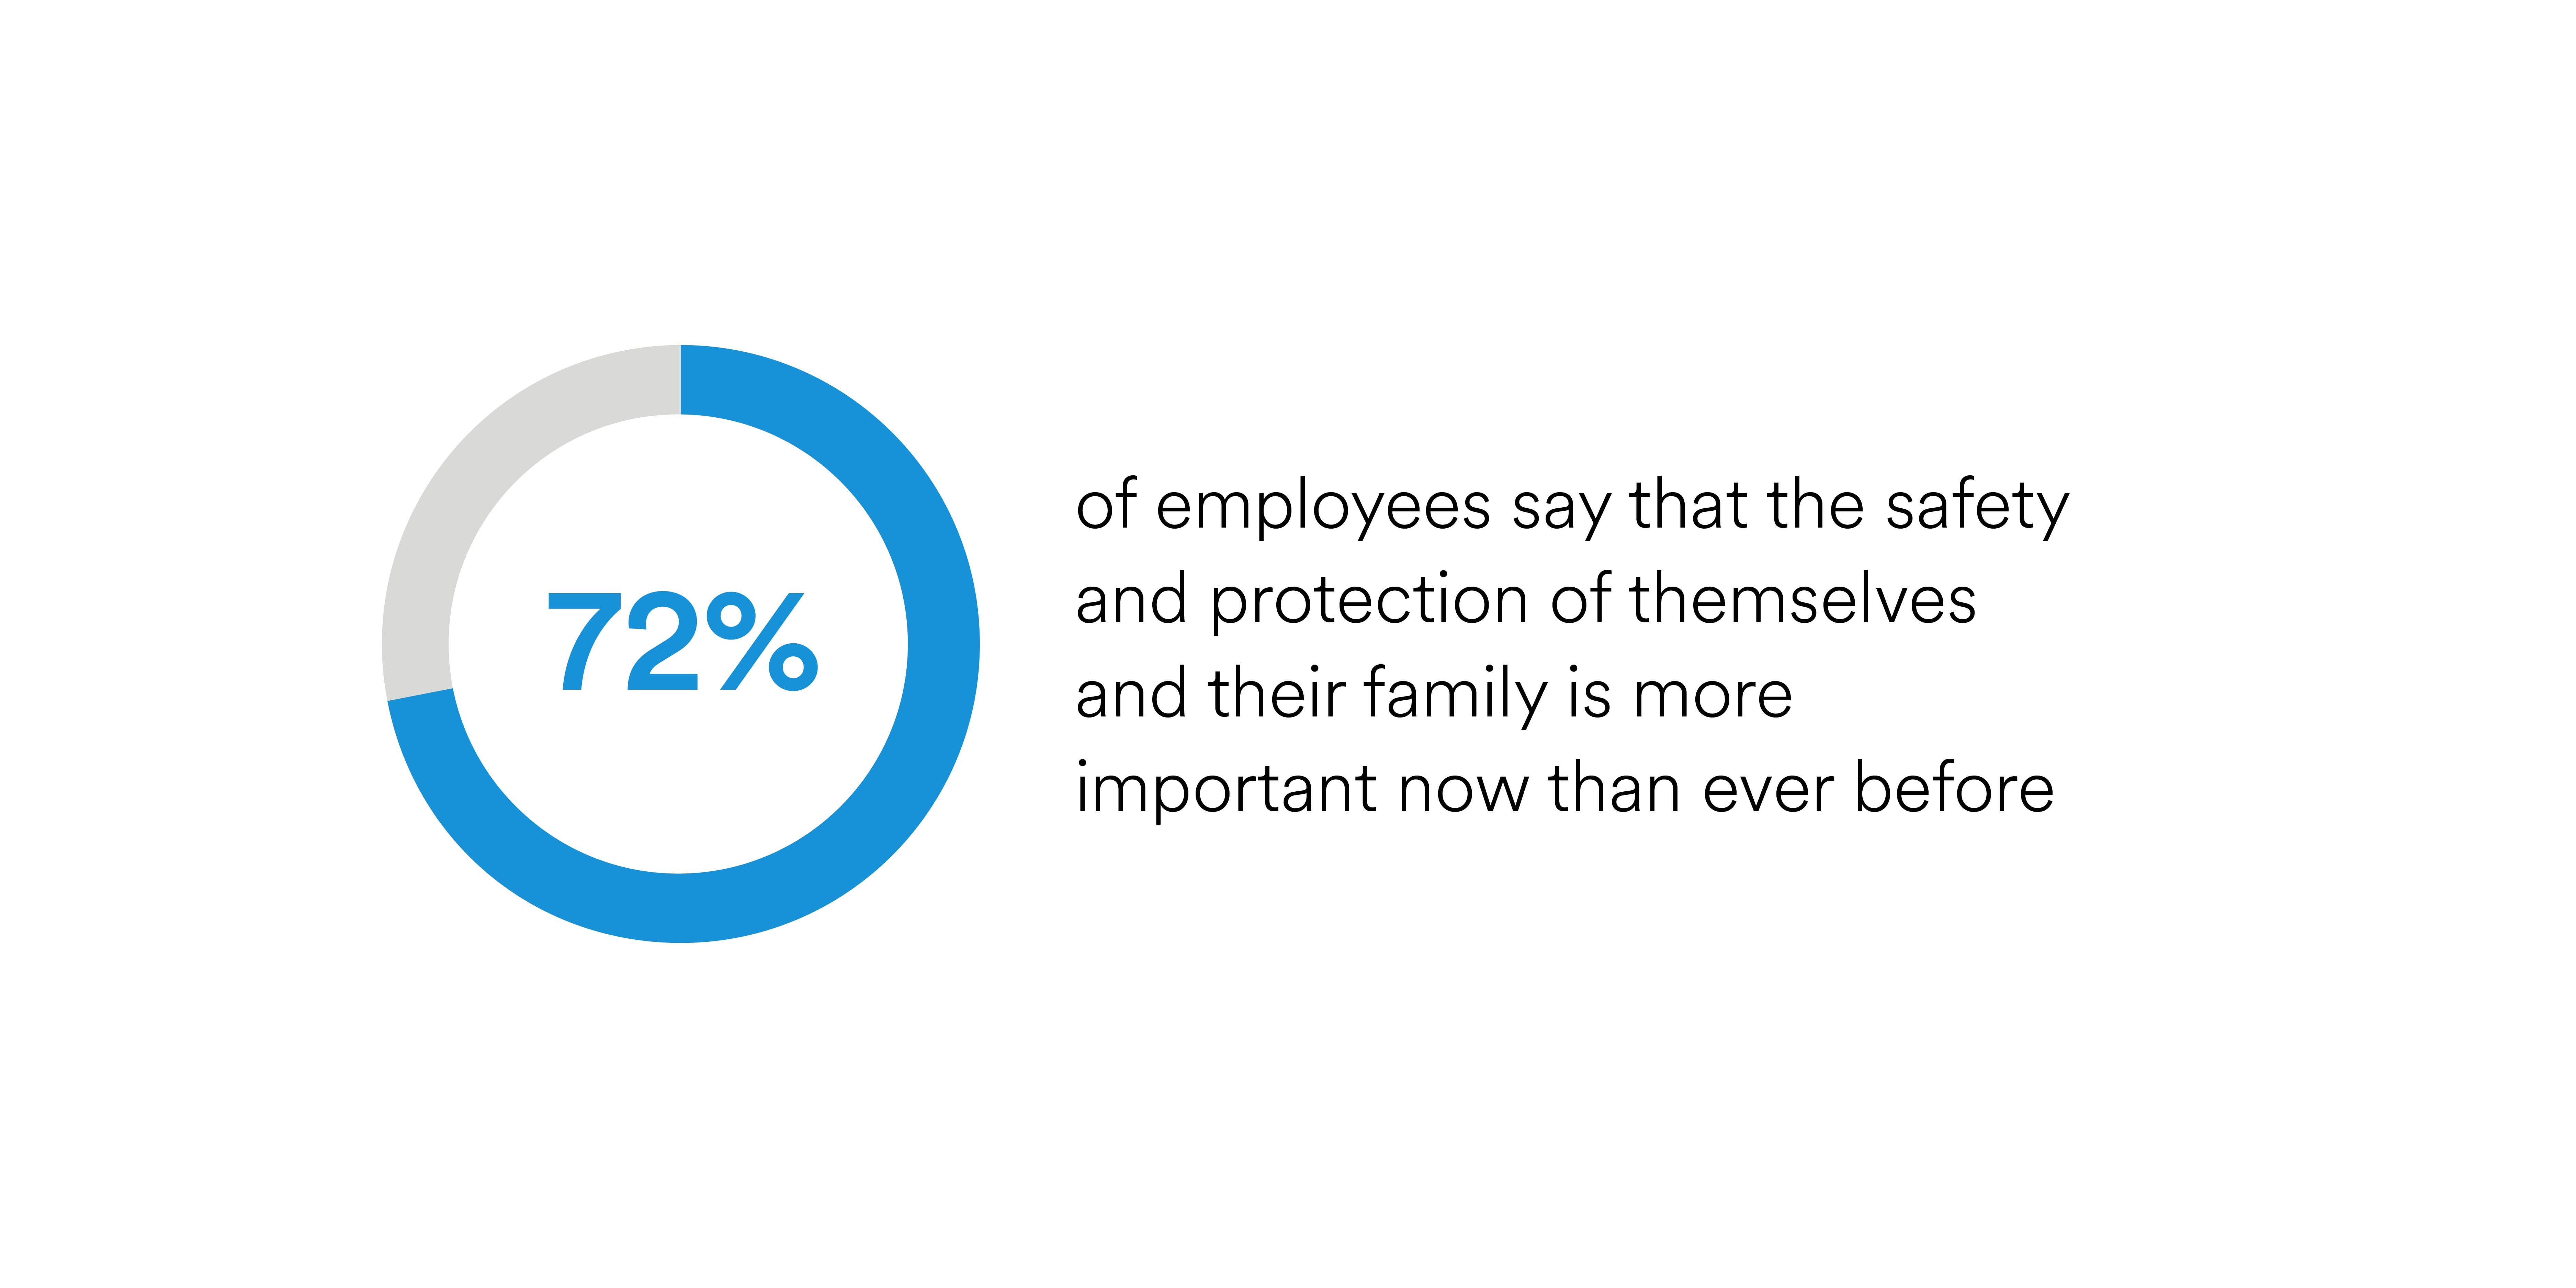 72 percent of employees think family safety and protection are more important now